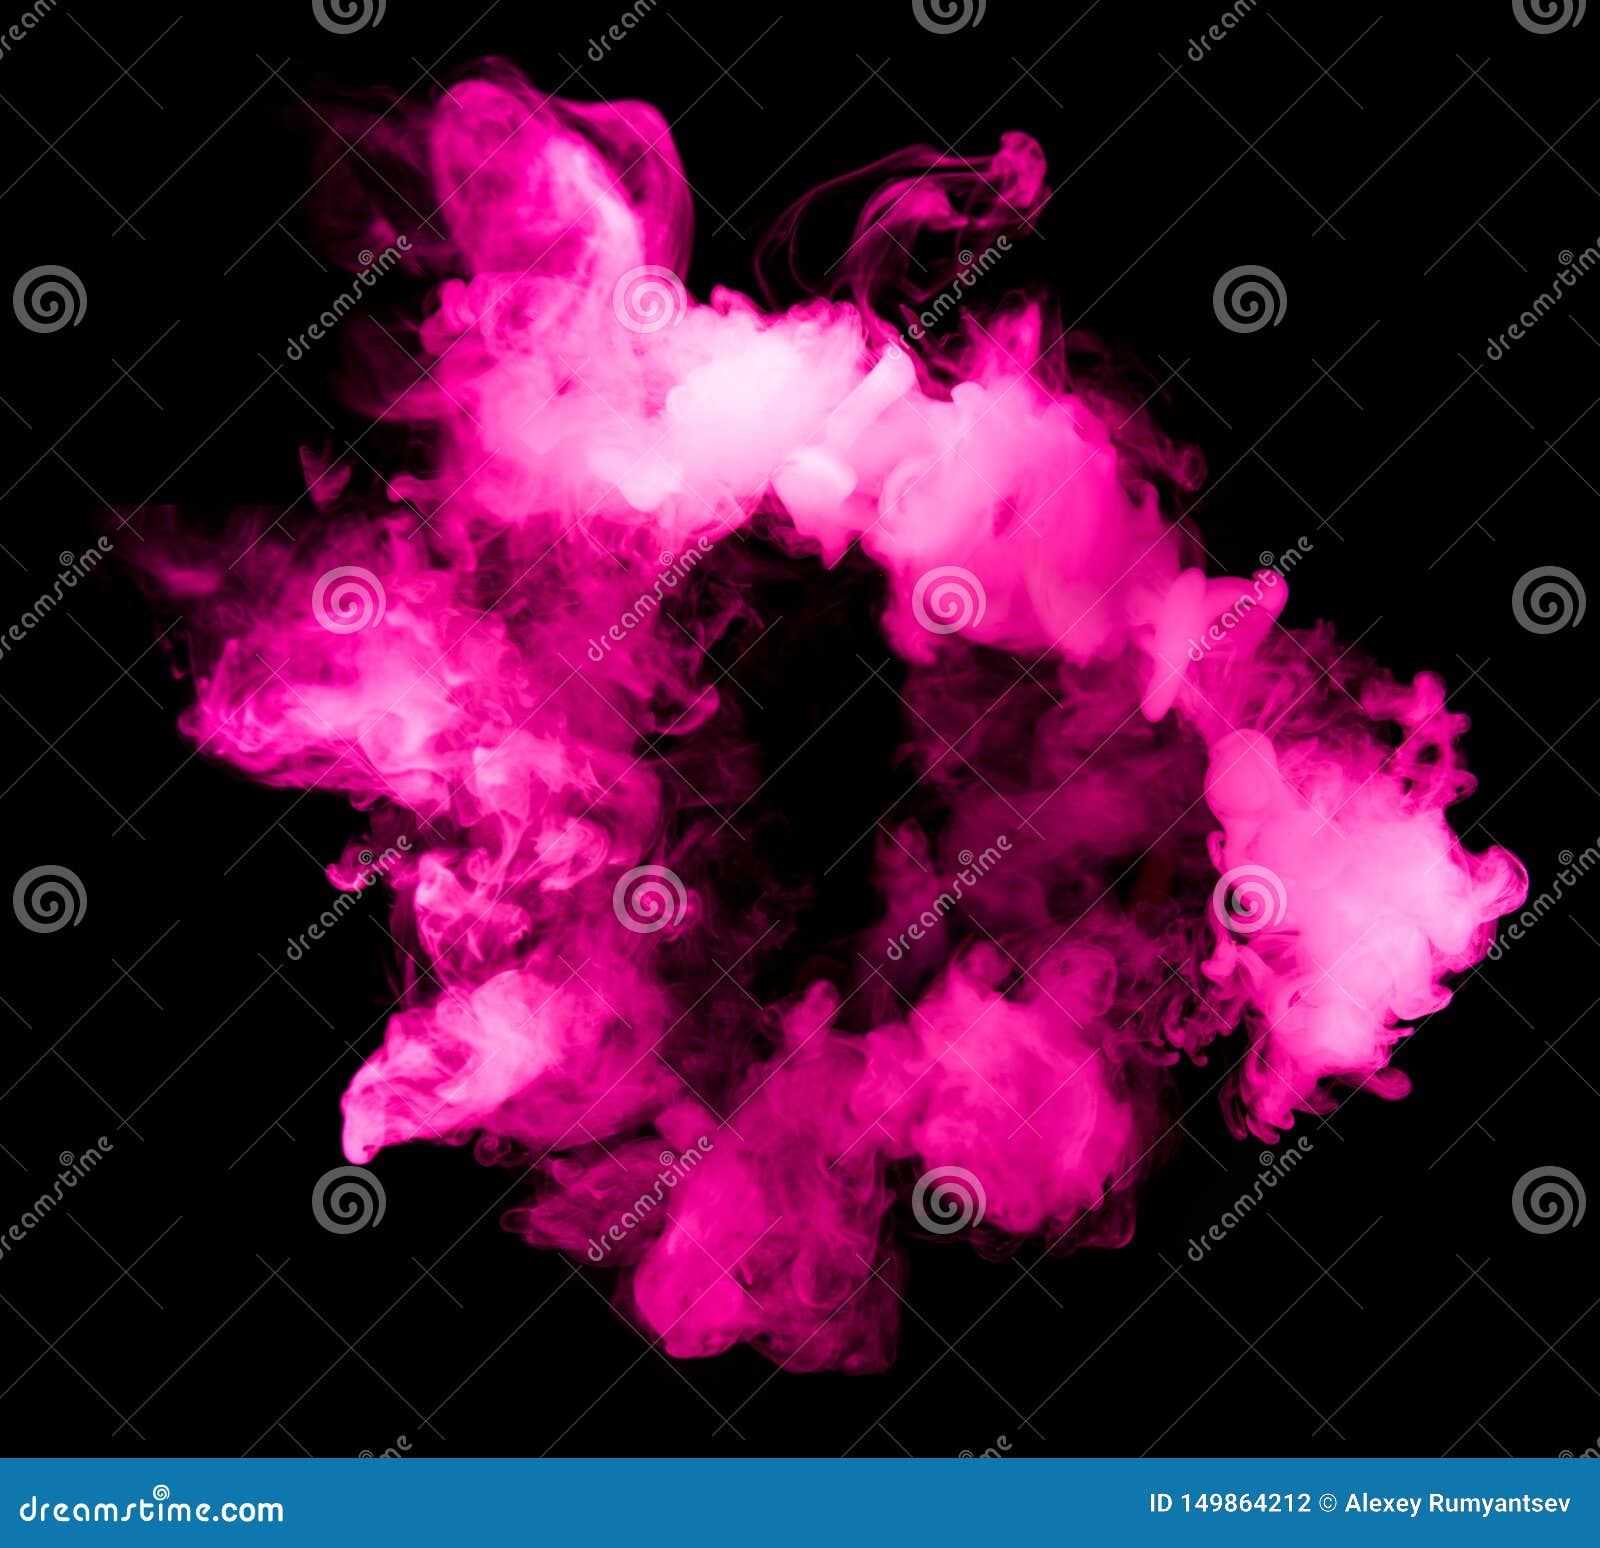 Fusion of Pink Smoke in Motion Stock Photo - Image of explosion, creative:  149864212